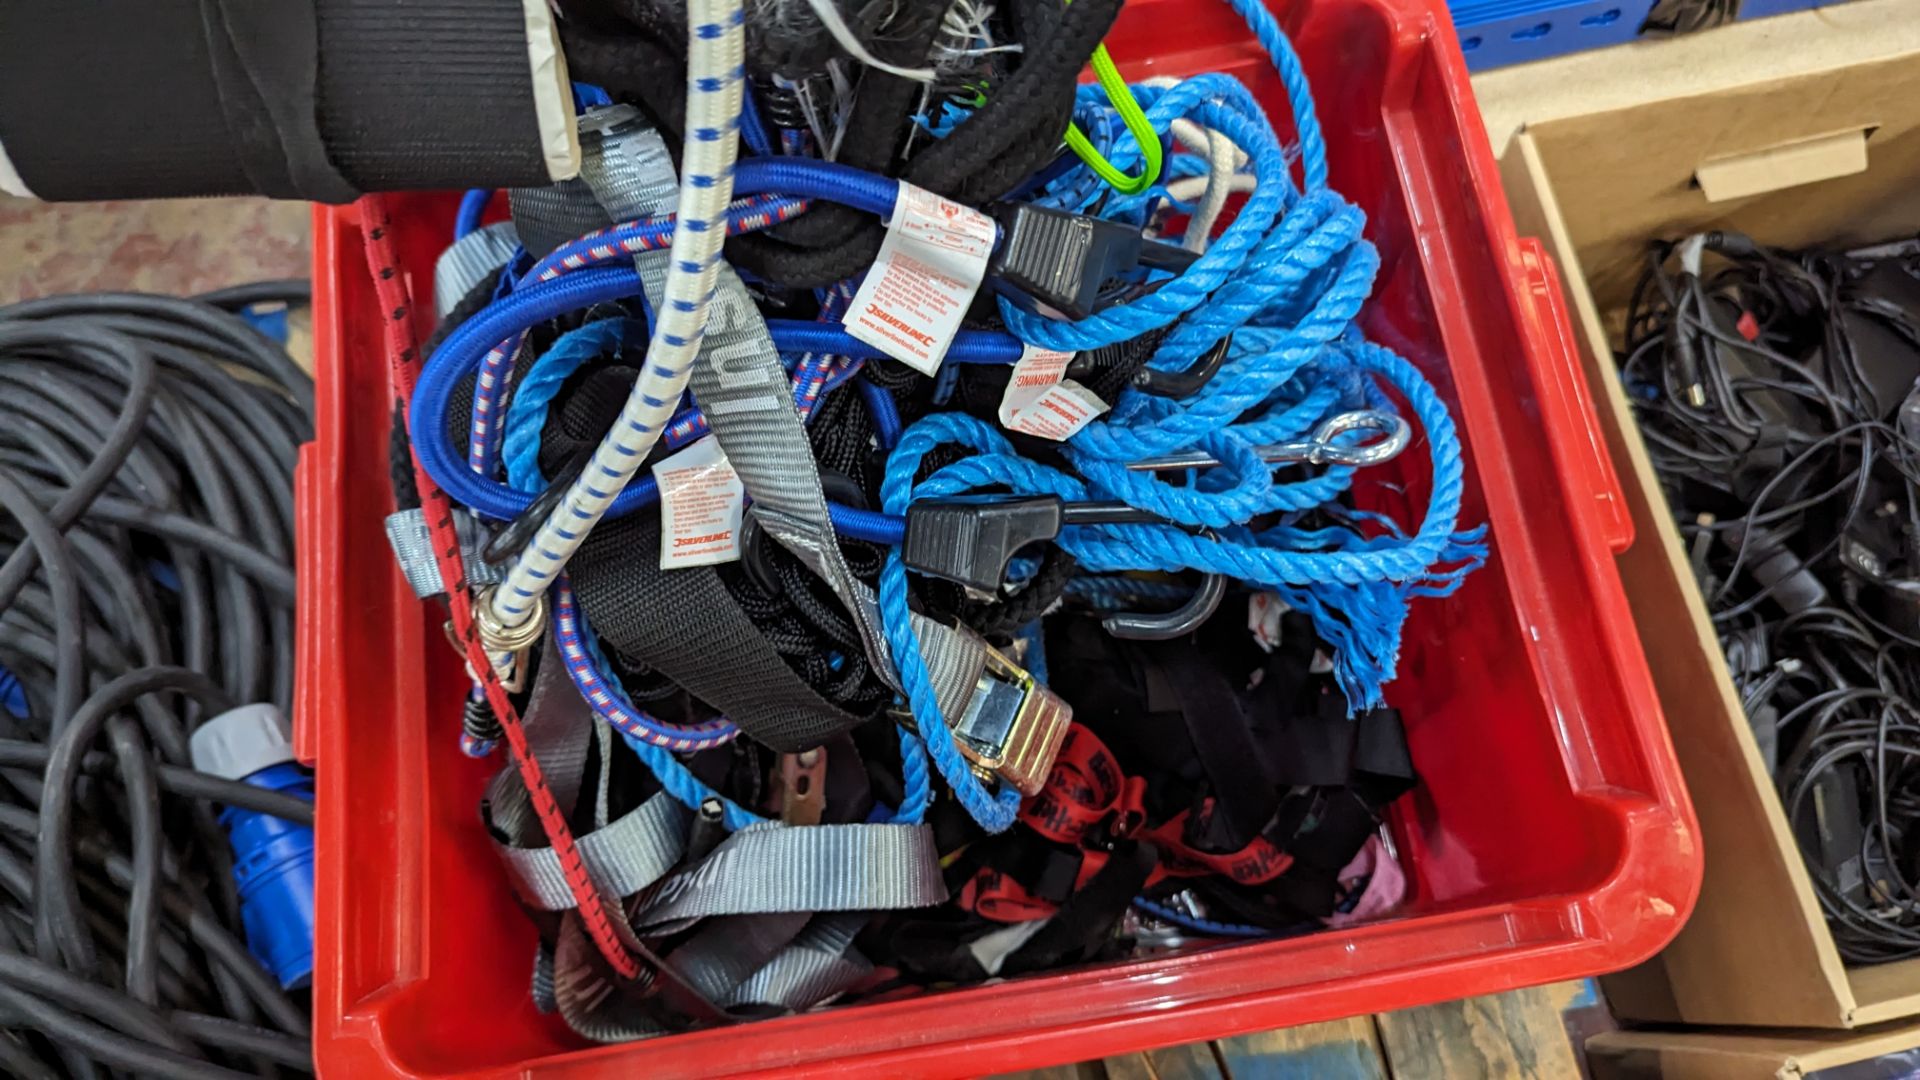 Box of ratchet straps, bungee cords & Velcro - Image 5 of 9